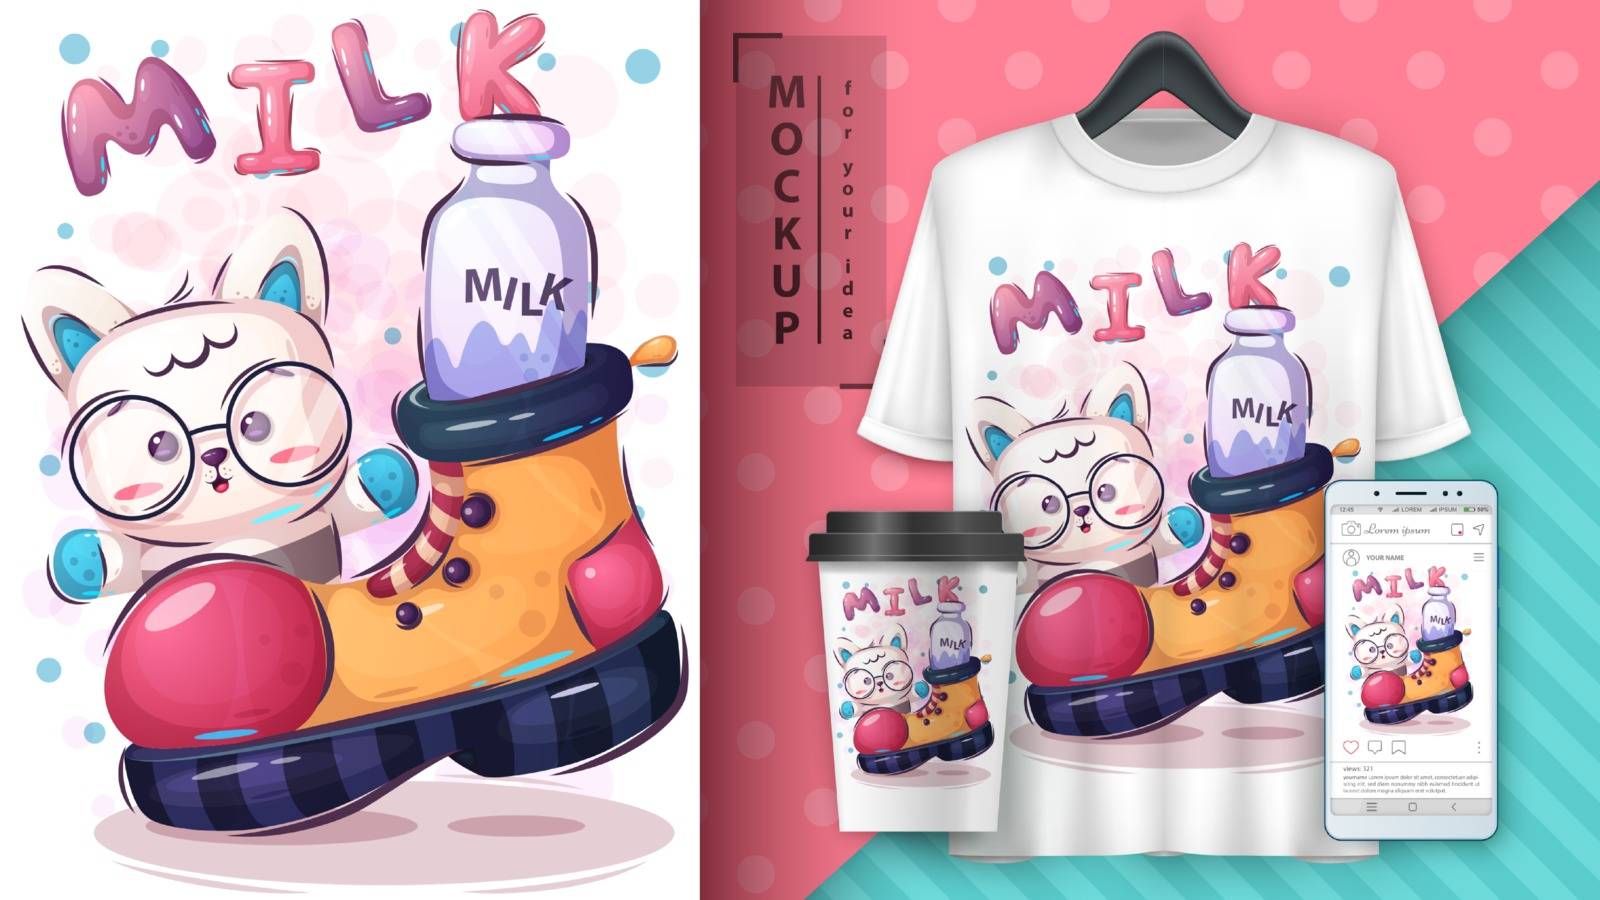 Cute kitty poster and merchandising by rwgusev